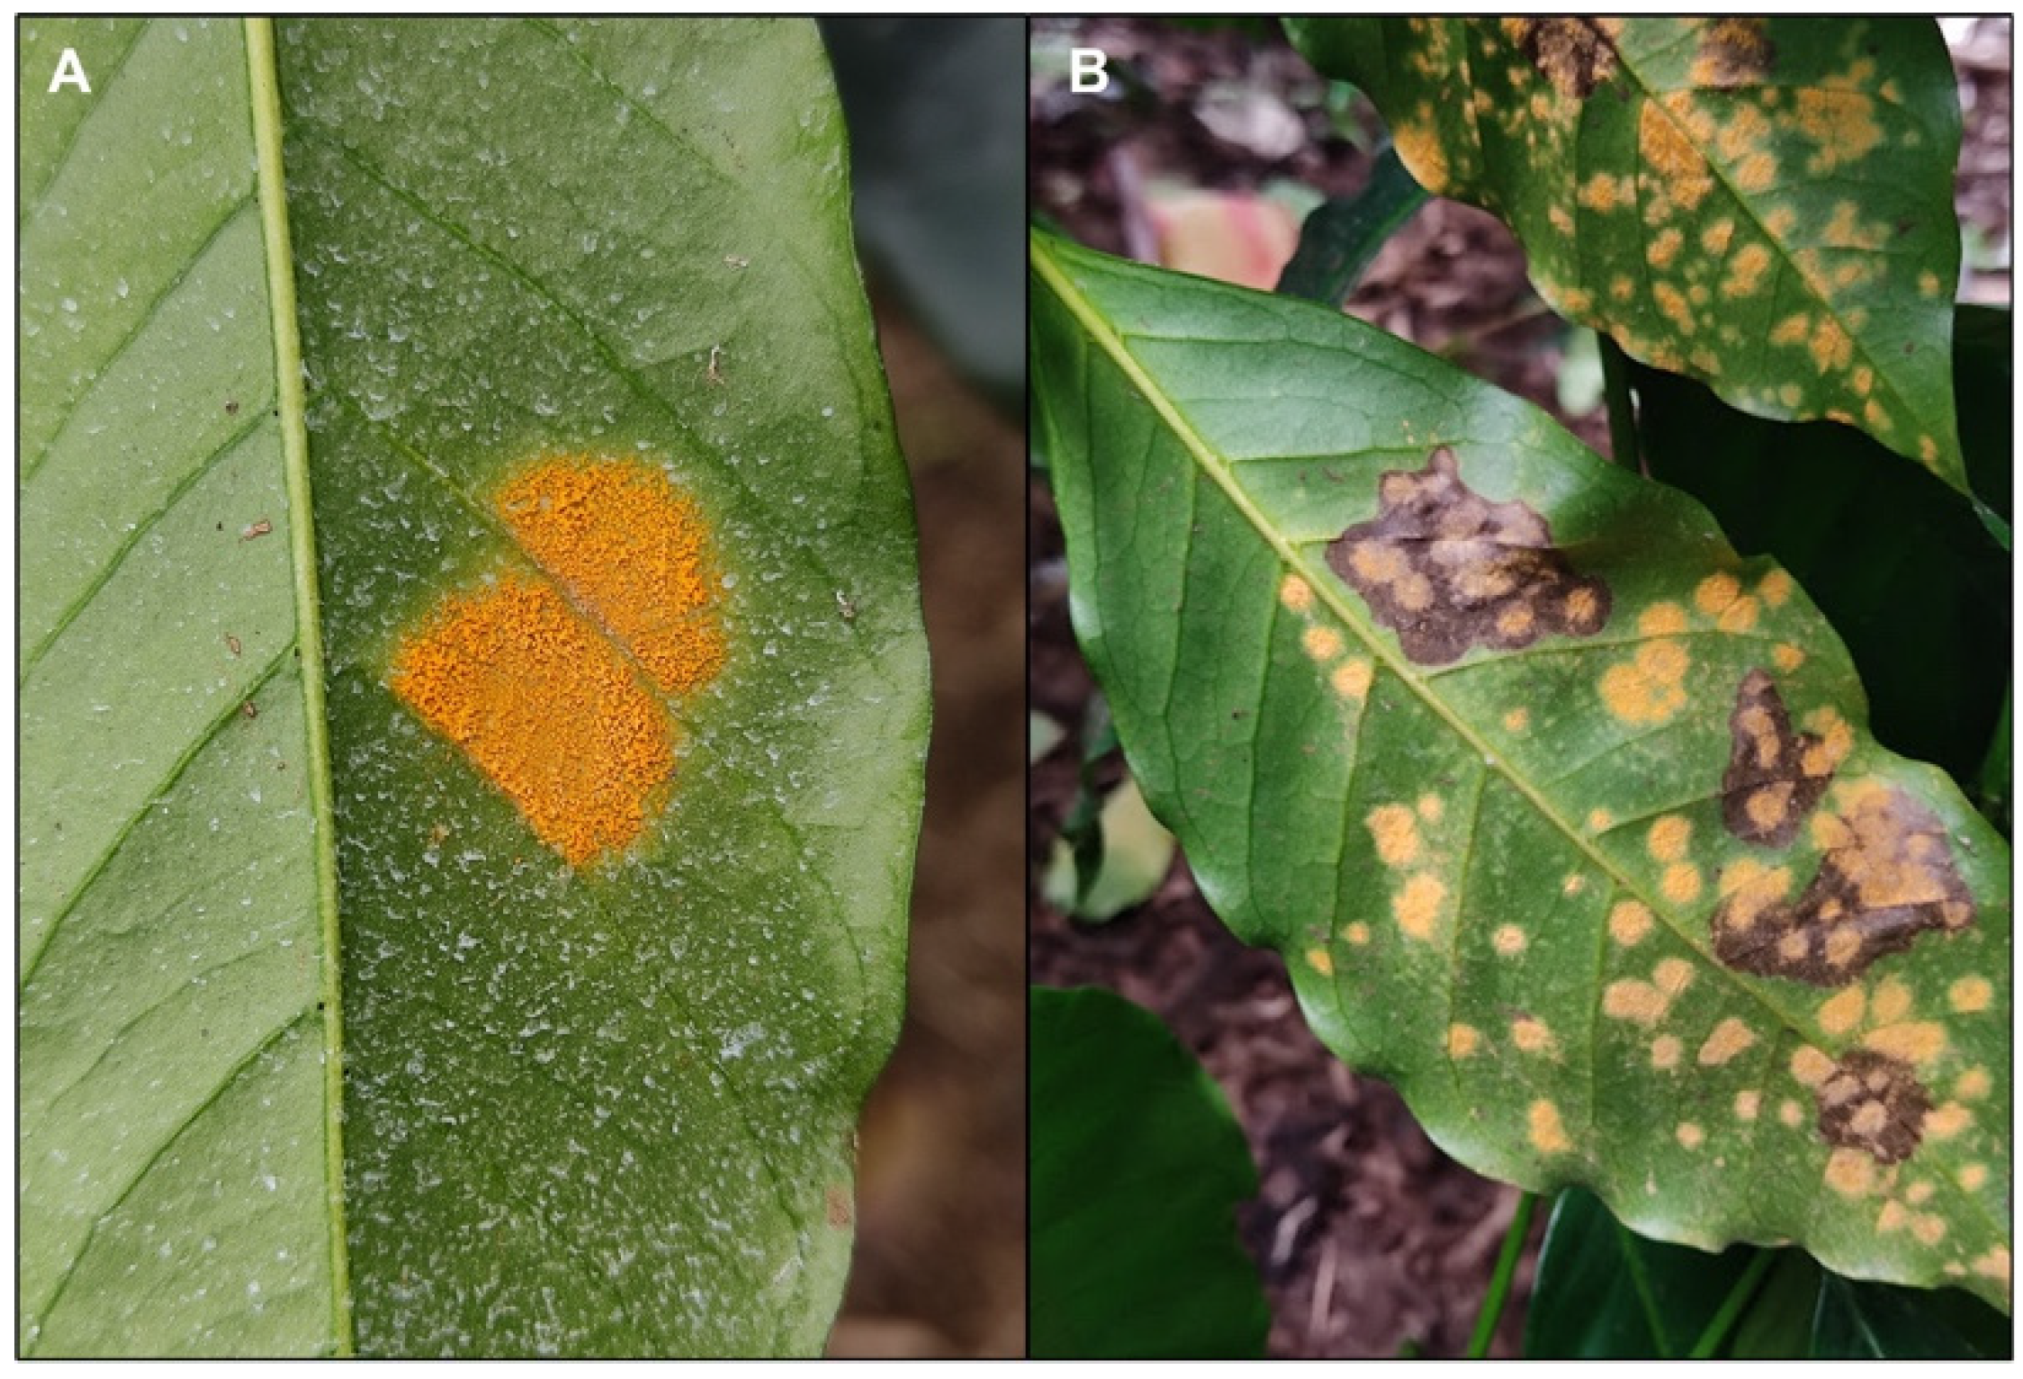 Agronomy | Free Full-Text | Monitoring Coffee Leaf Rust (Hemileia  vastatrix) on Commercial Coffee Farms in Hawaii: Early Insights from the  First Year of Disease Incursion